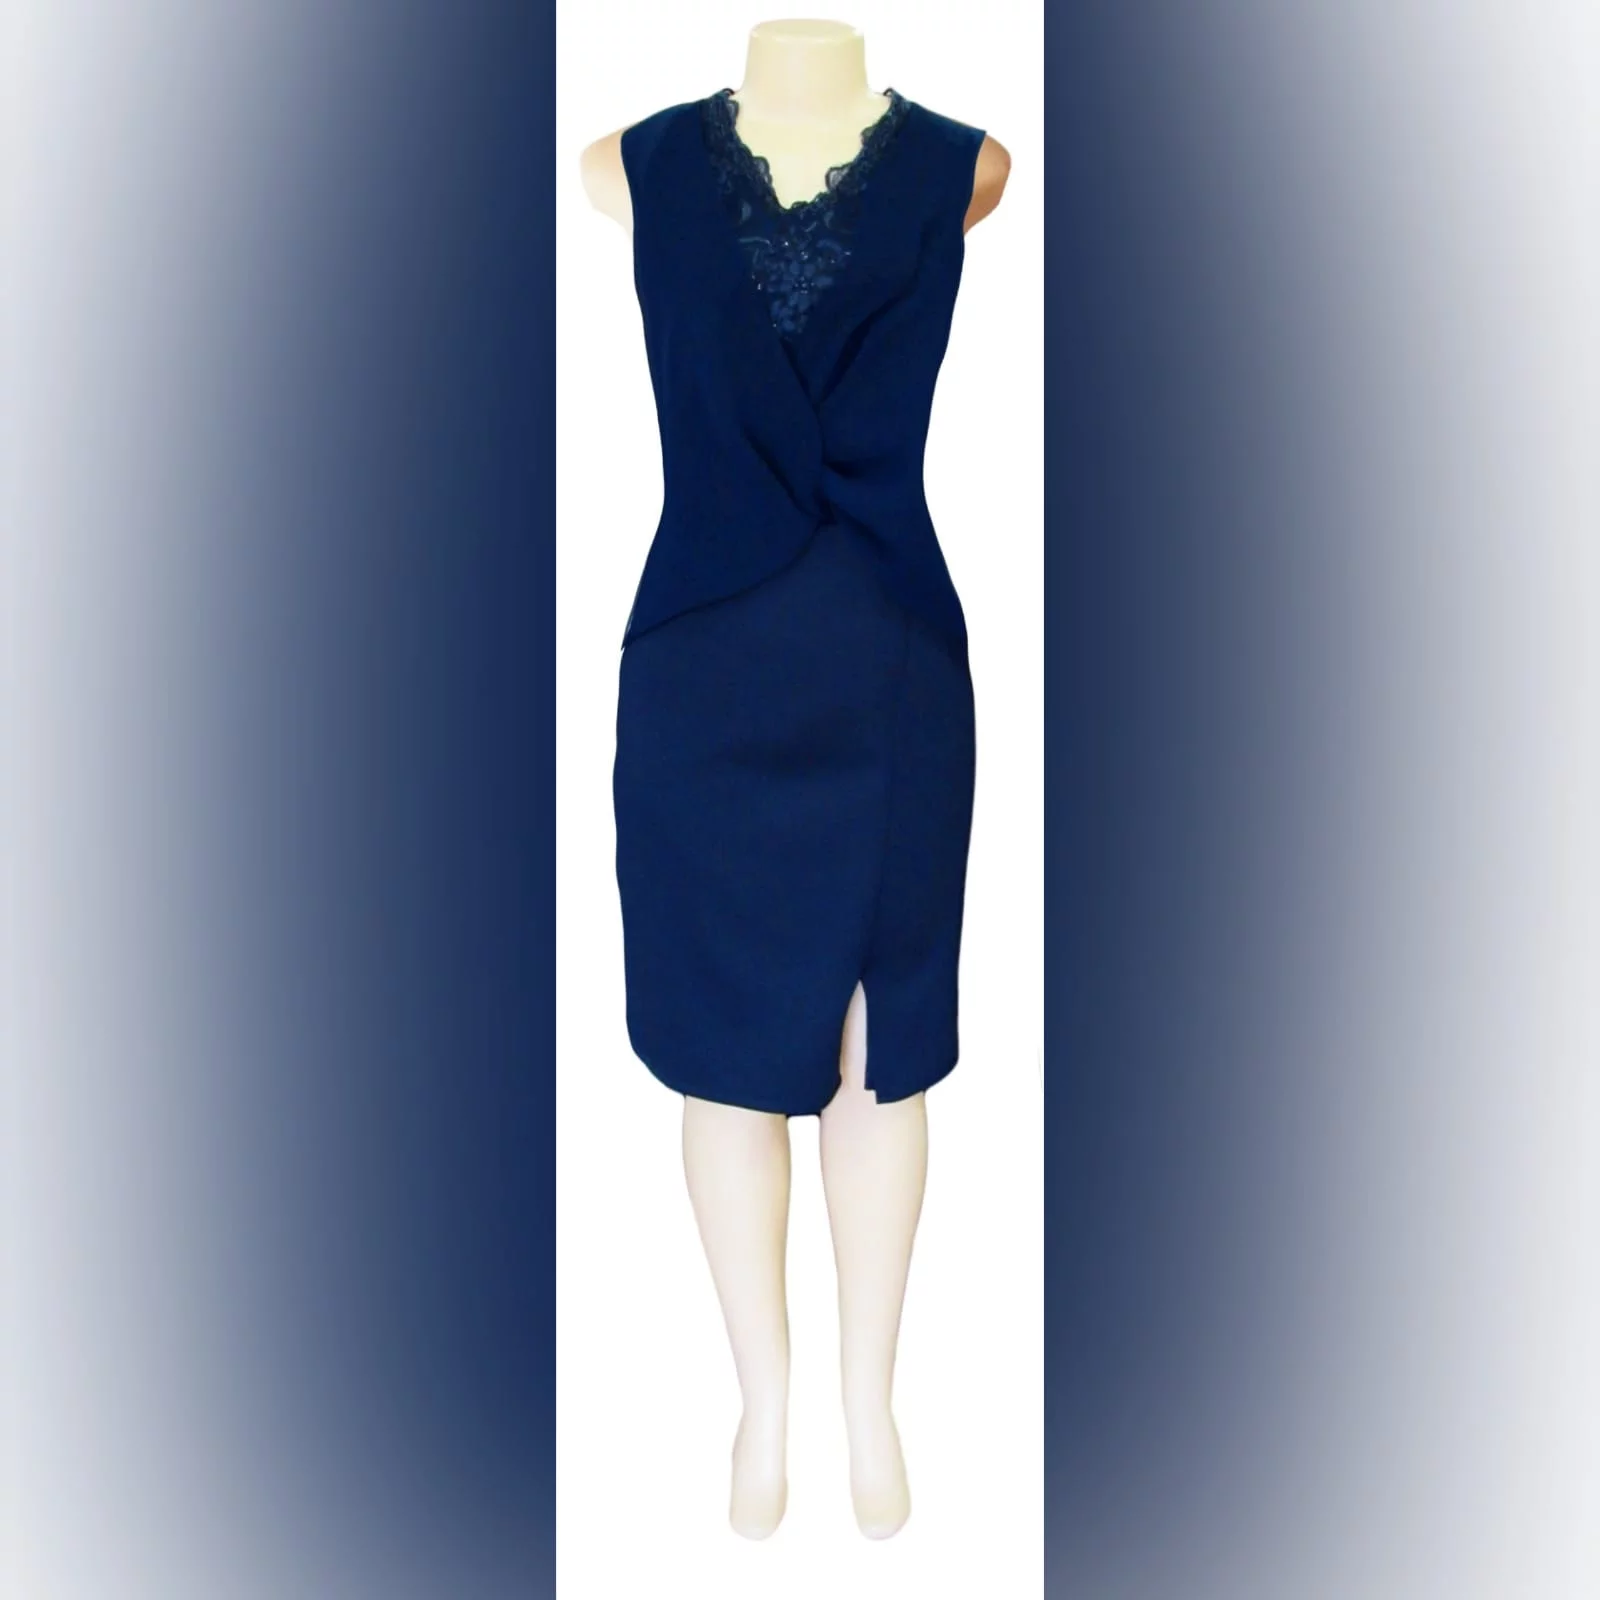 Navy blue knee length mother of the bride dress 5 navy blue knee length mother of the bride dress, fitted bottom, with a slit. Lace bodice with an overlay of pleated chiffon.